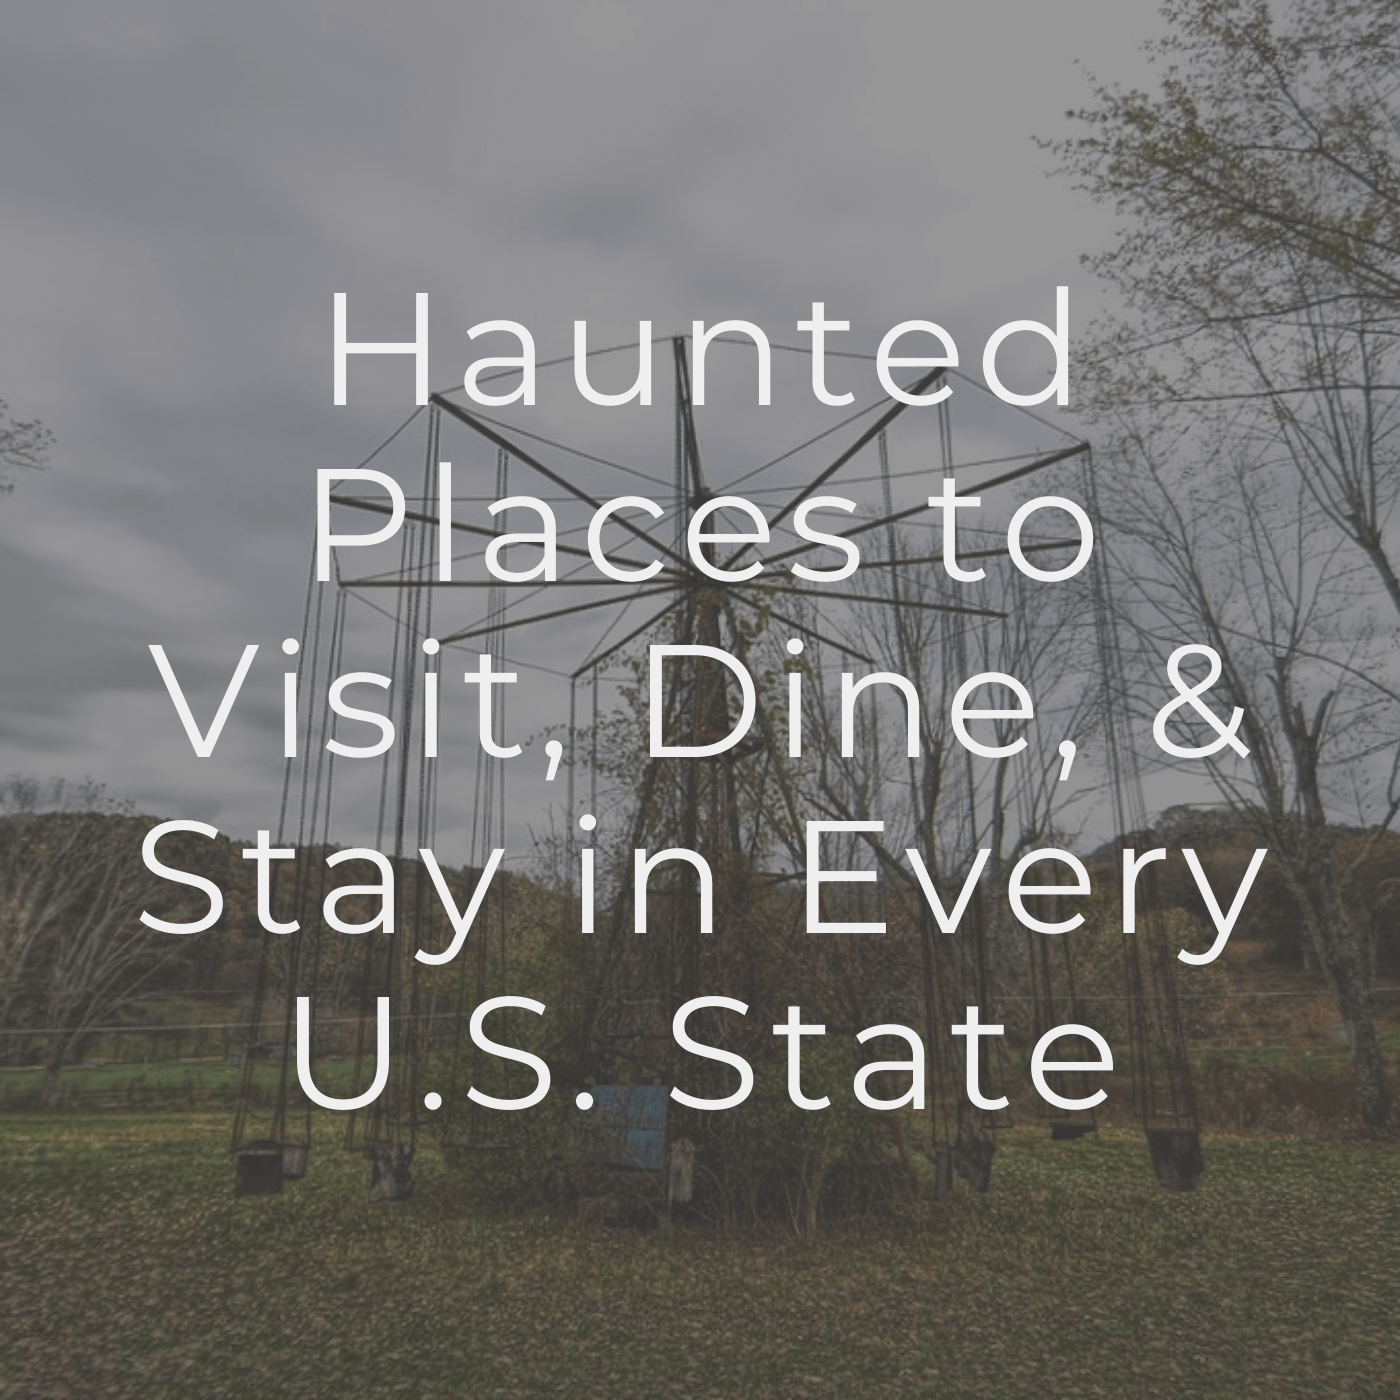 Haunted Places to Visit, Dine, & Stay in Every U.S. State